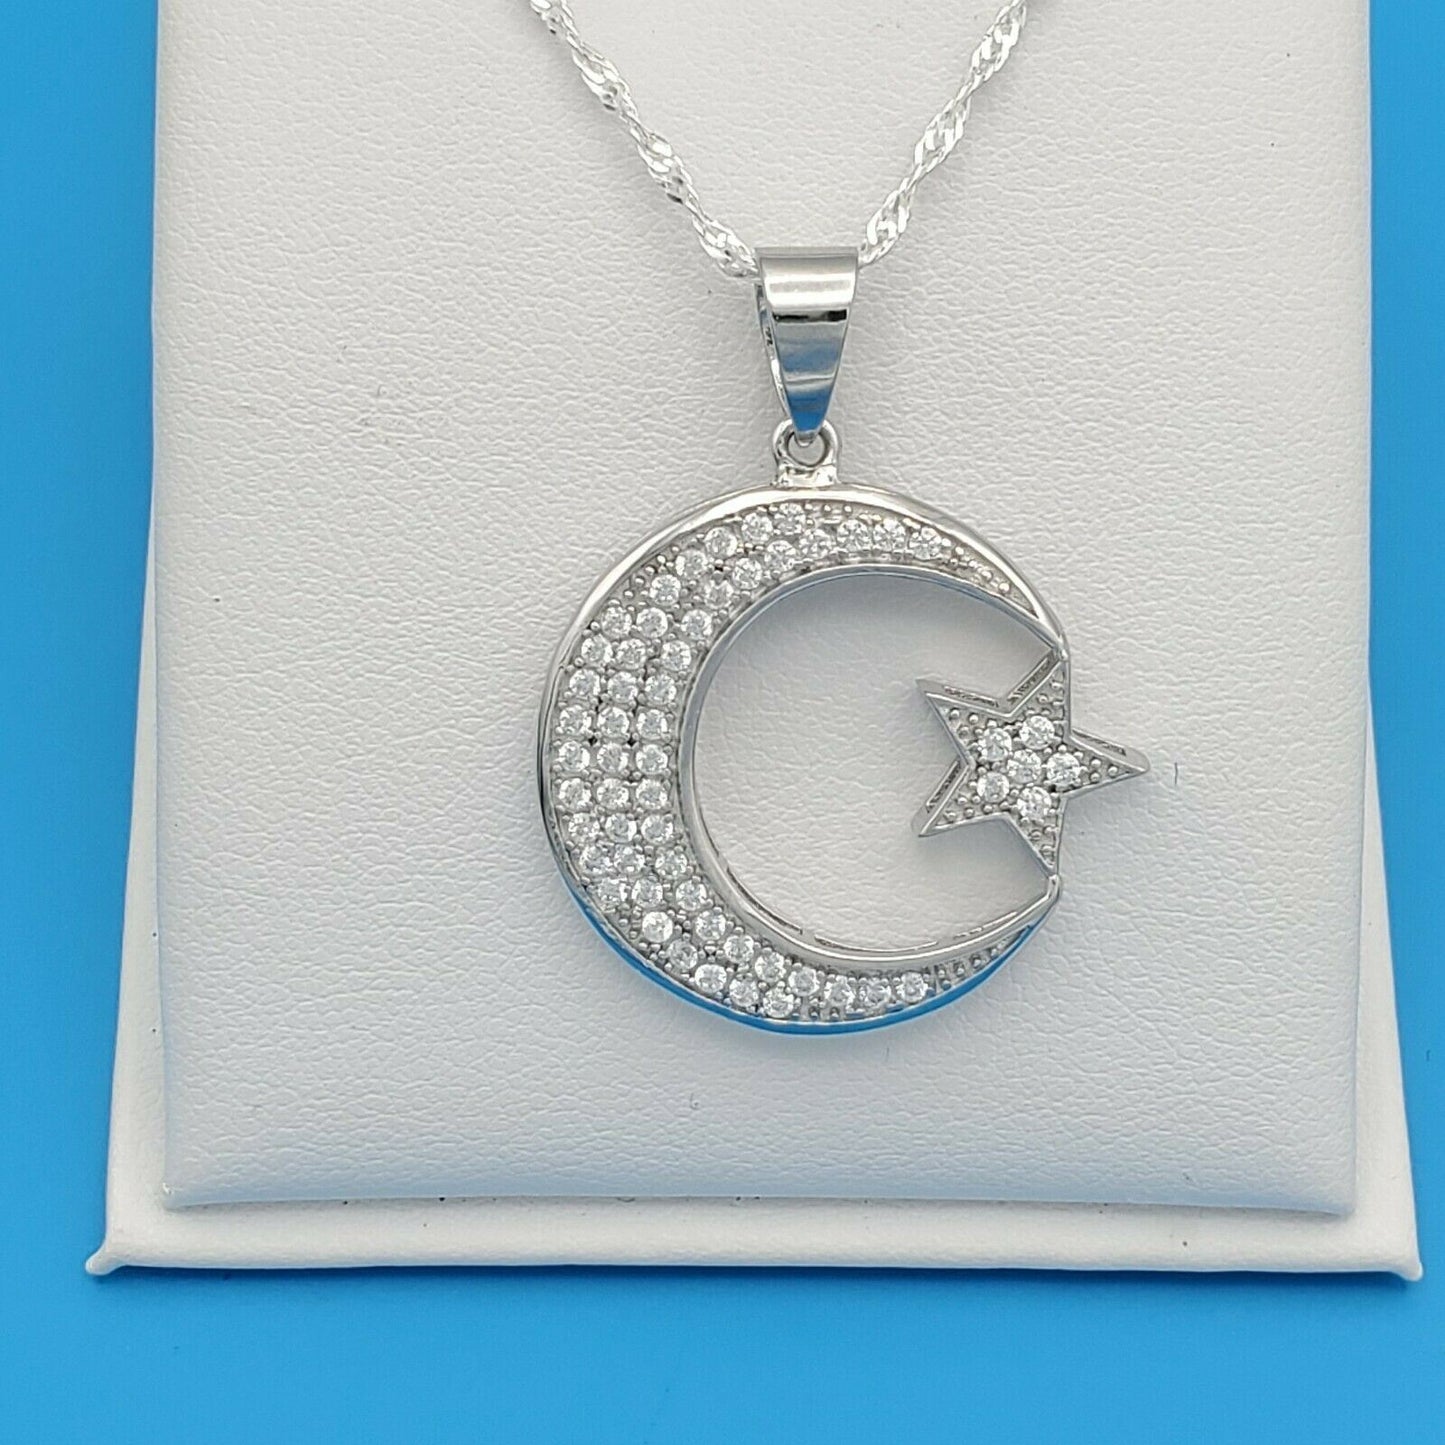 Solid 925 Sterling Silver. Moon & Star CZ Crystals Pendant & Chain